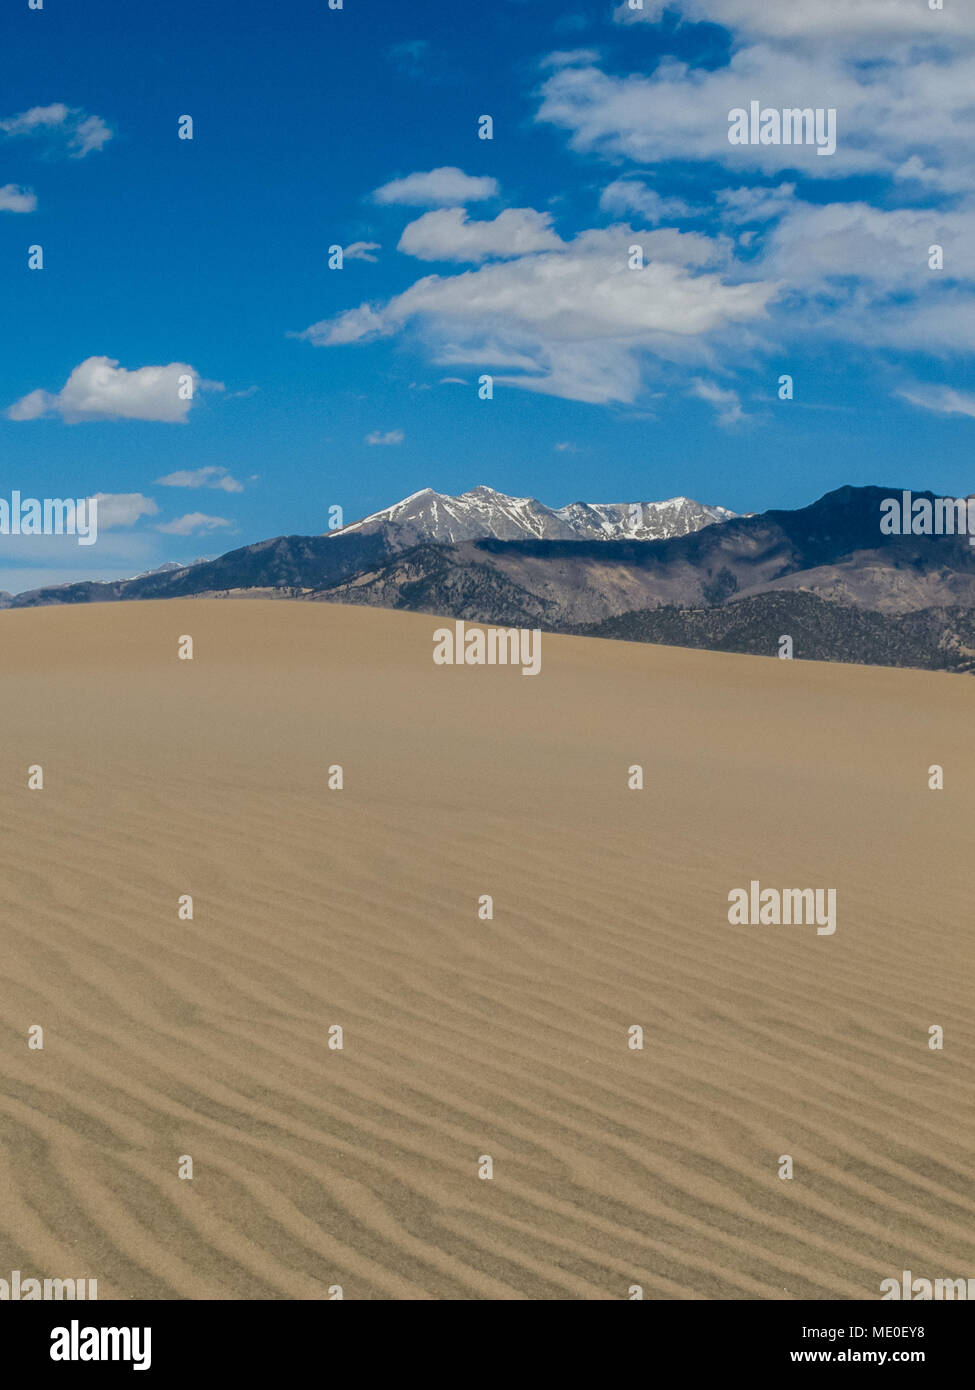 Great Sand Dunes National Park, Colorado is threatened by the Trump Administrations interest in opening nearby land for mineral extraction. Stock Photo